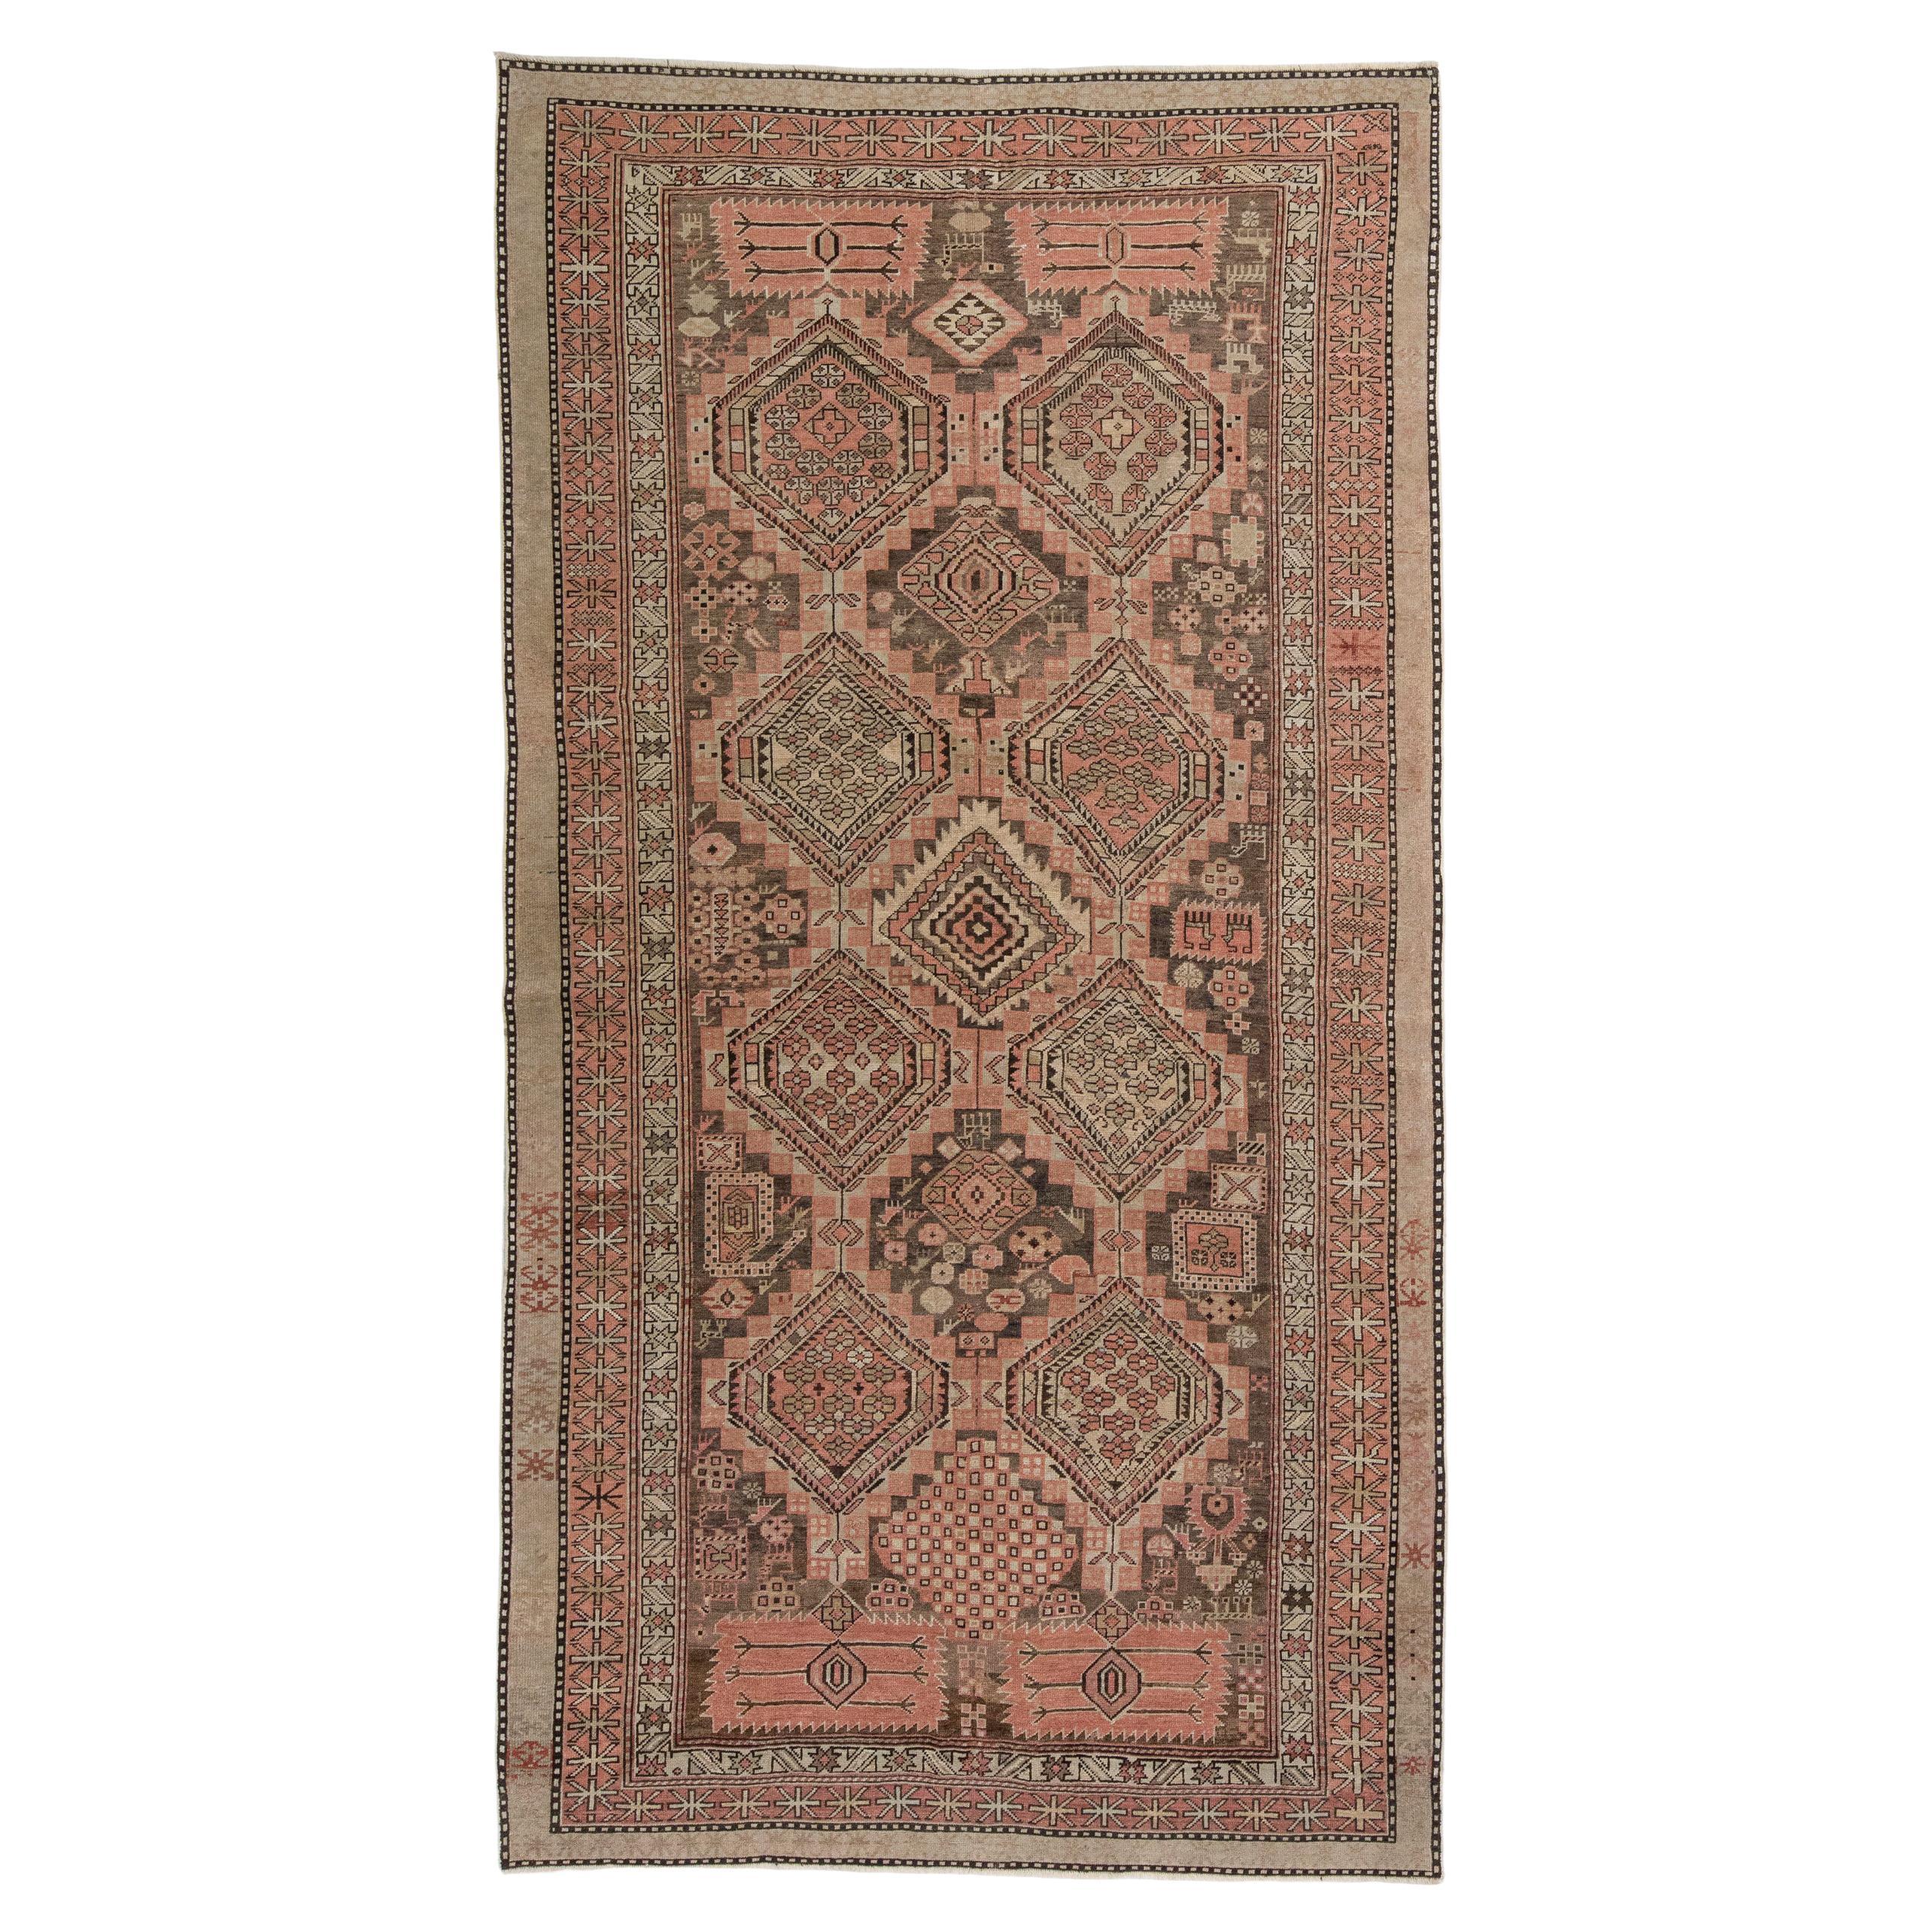 Antique Caucasian Shirvan Tribal Rug in Light Brown and Coral Rust Color For Sale